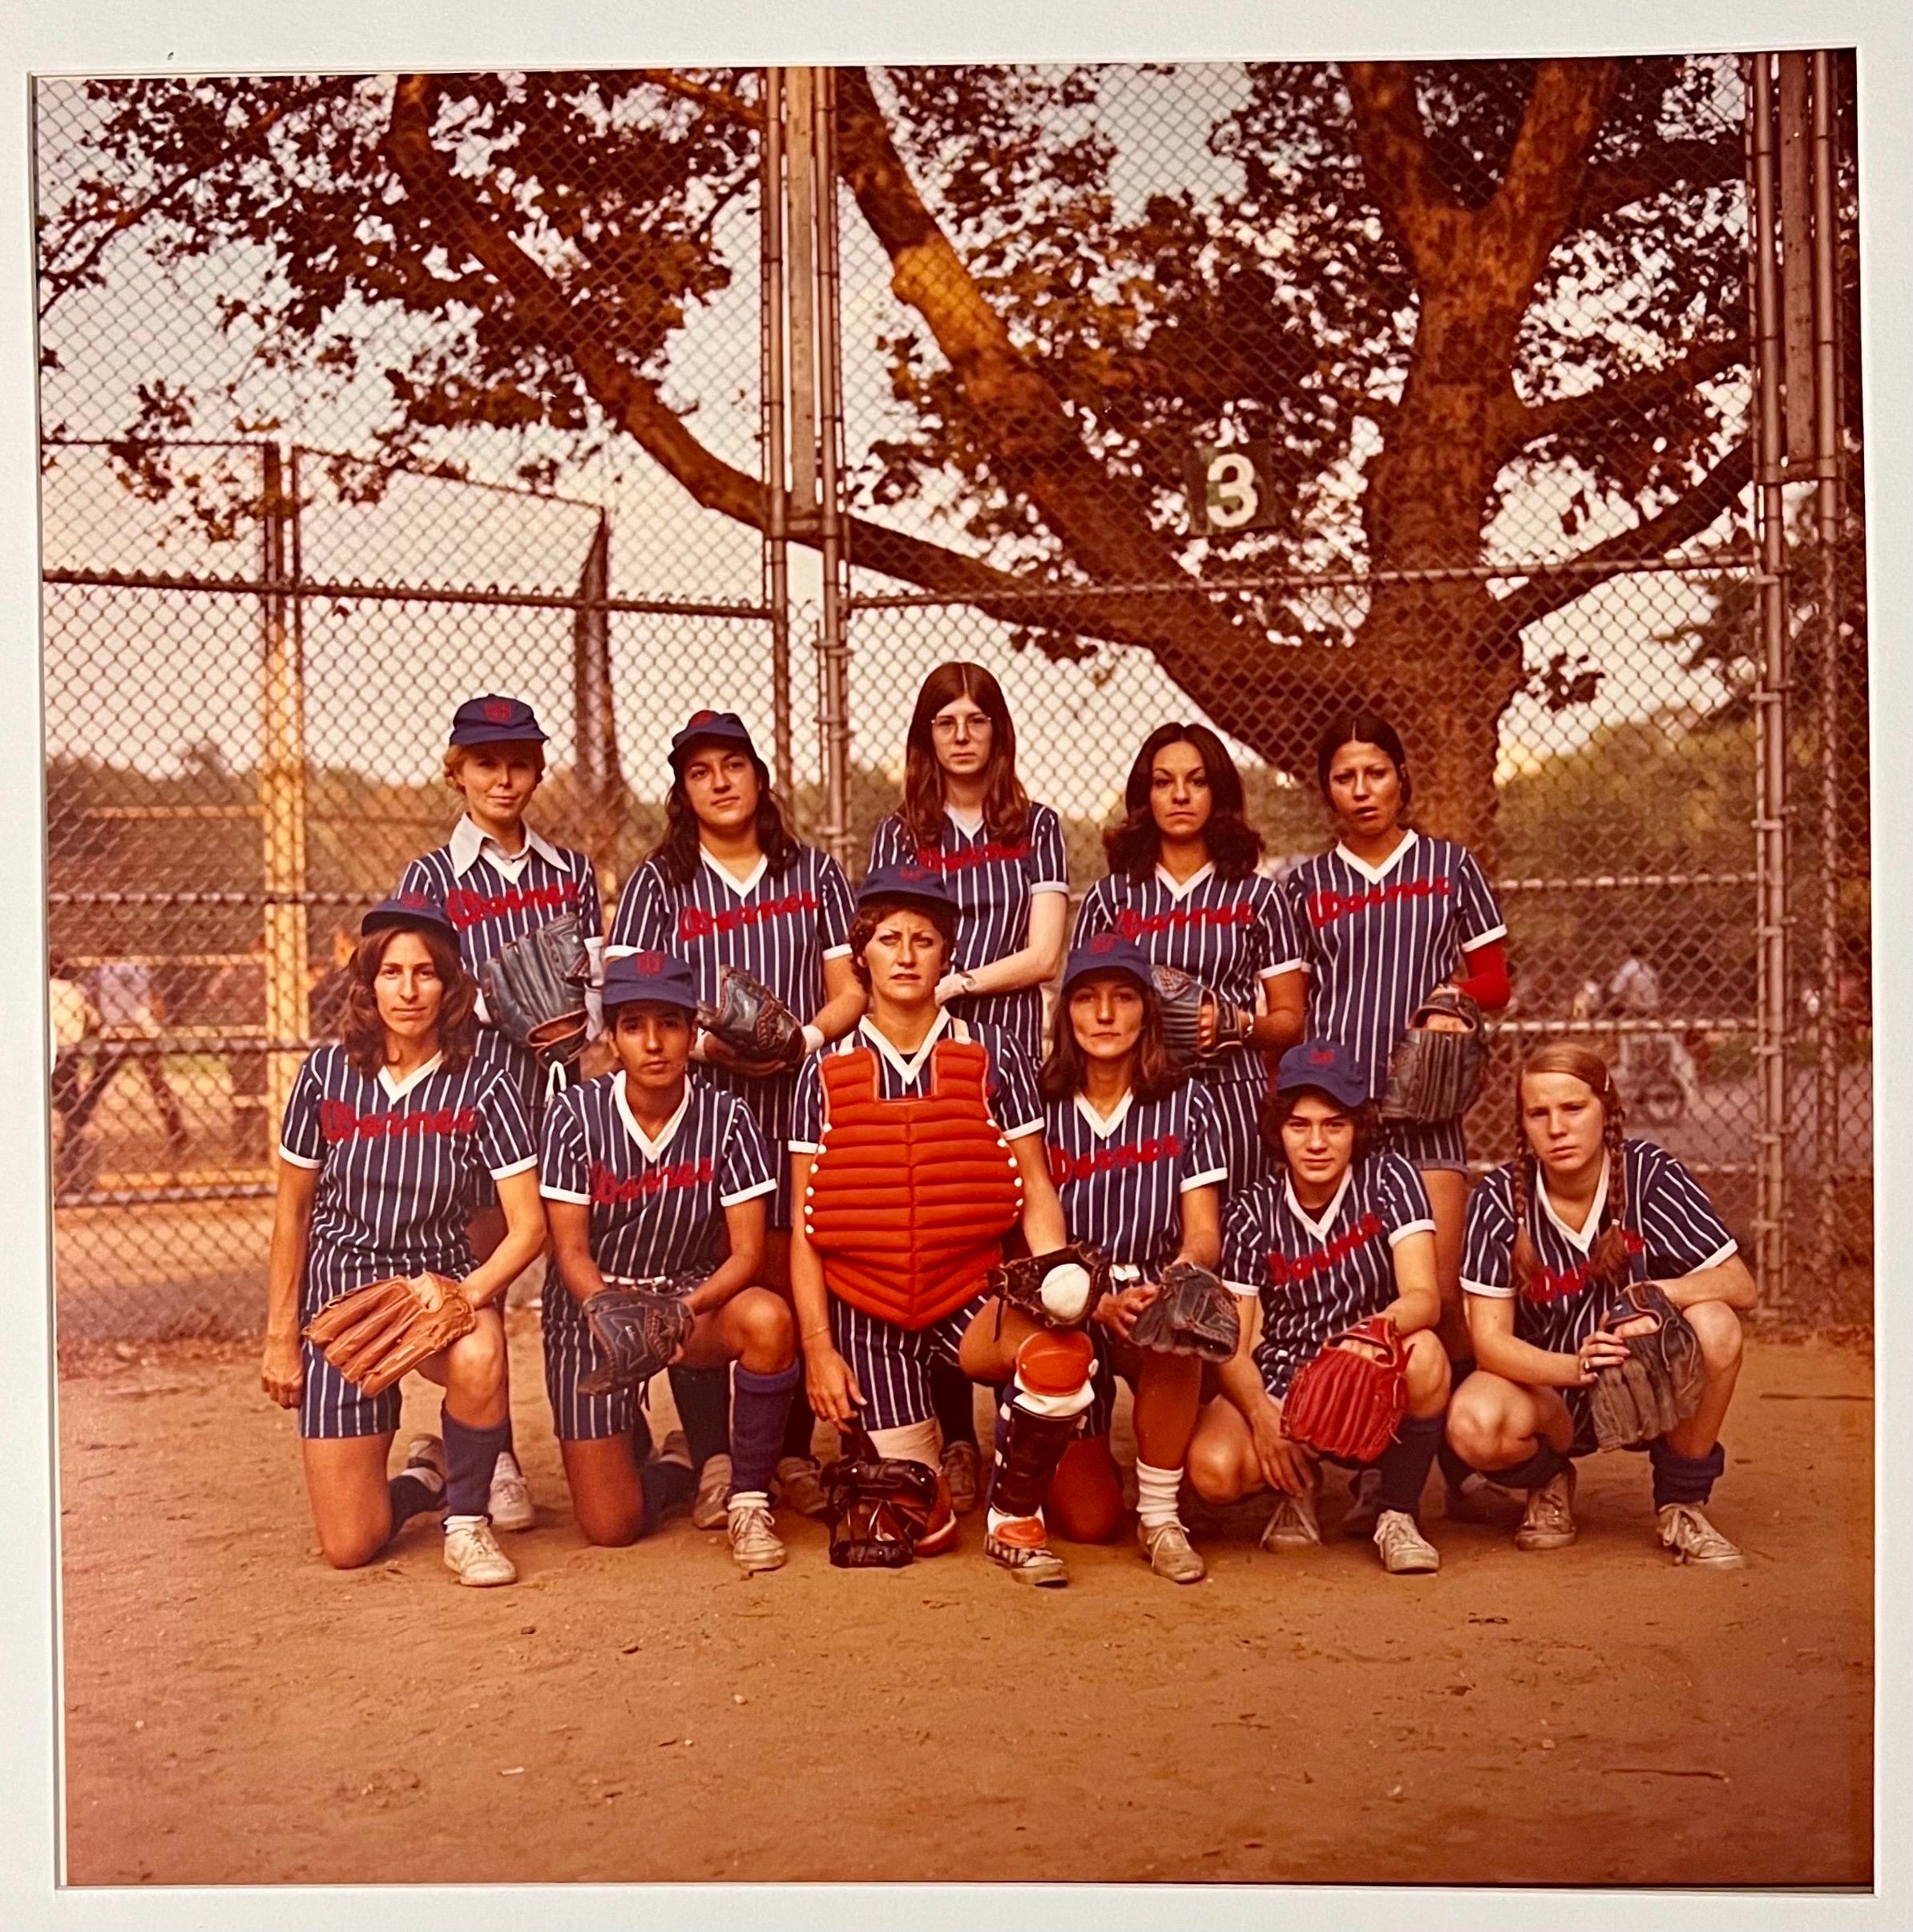 Neal Slavin (American, b. 1941)
Women's Intramural Softball Team of Warner Communications, Inc. New York, N.Y.
Vintage C-print [Chromogenic development print; Ektacolor prints]
Hand signed and numbered by the photographer 48/75
Photos made with 2.25